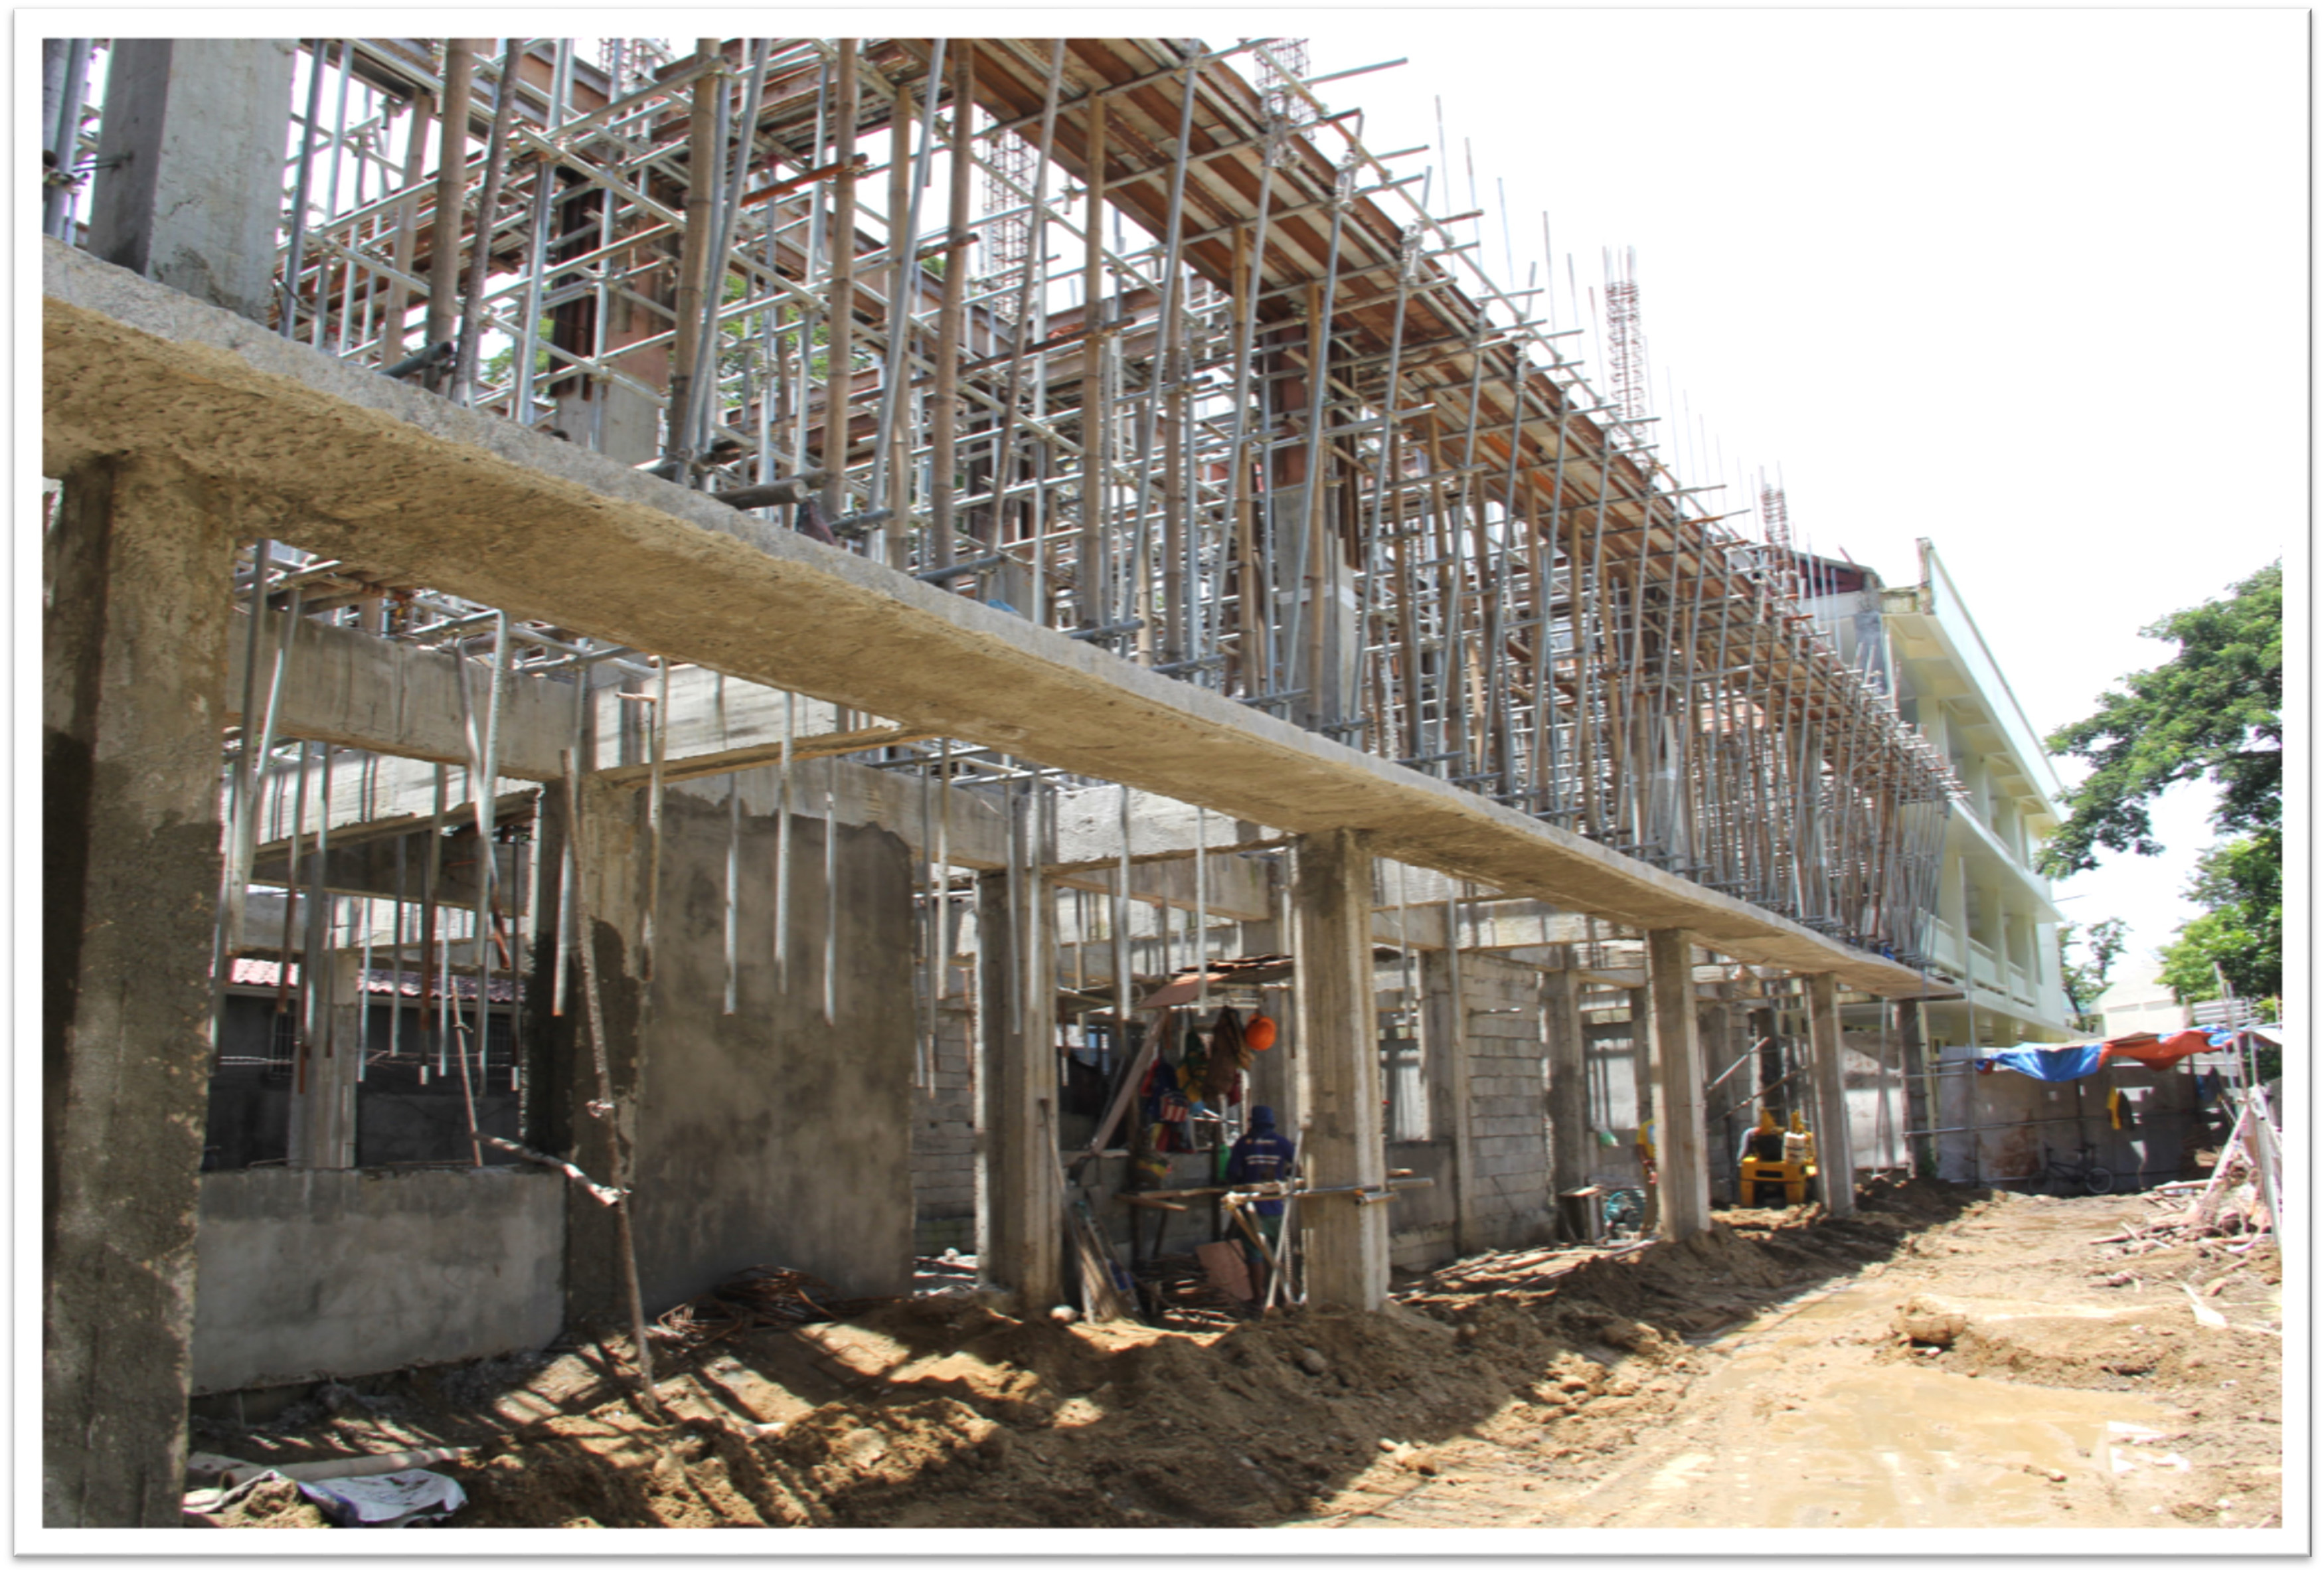 the on-going construction of the building that will house the College of education and the Laboratory School.